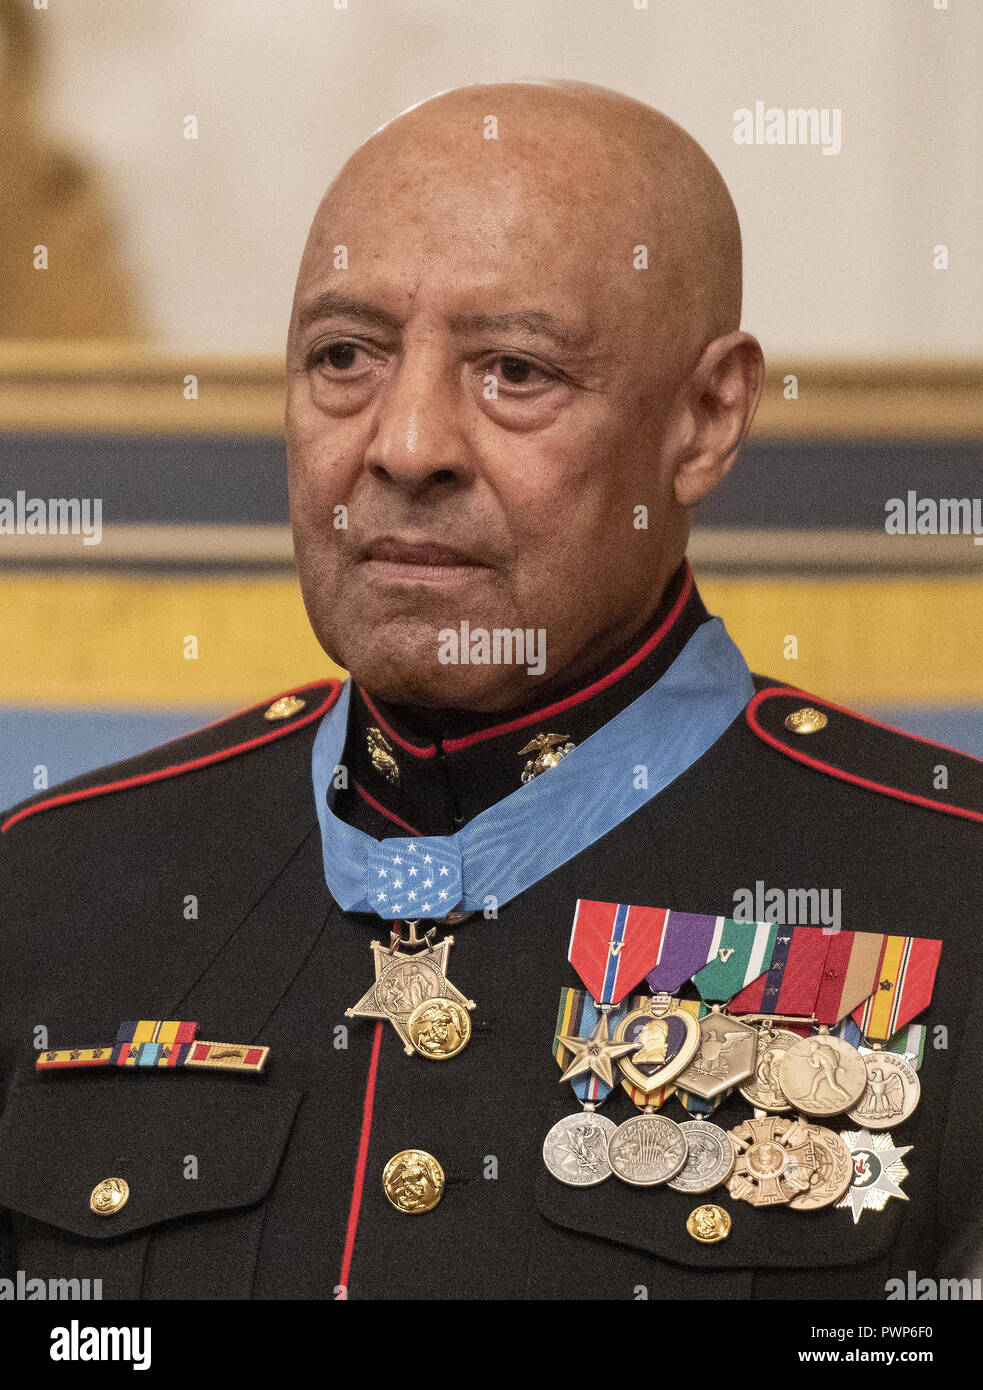 Washington, District of Columbia, USA. 17th Oct, 2018. Sergeant Major John L. Canley, United States Marine Corps (Retired) wears his medal at the conclusion of the ceremony where US President Donald J. Trump awarded him the Medal of Honor for conspicuous gallantry during the Vietnam War in a ceremony in the East Room of the the White House in Washington, DC on Wednesday, October 17, 2018 Credit: Ron Sachs/CNP/ZUMA Wire/Alamy Live News Stock Photo